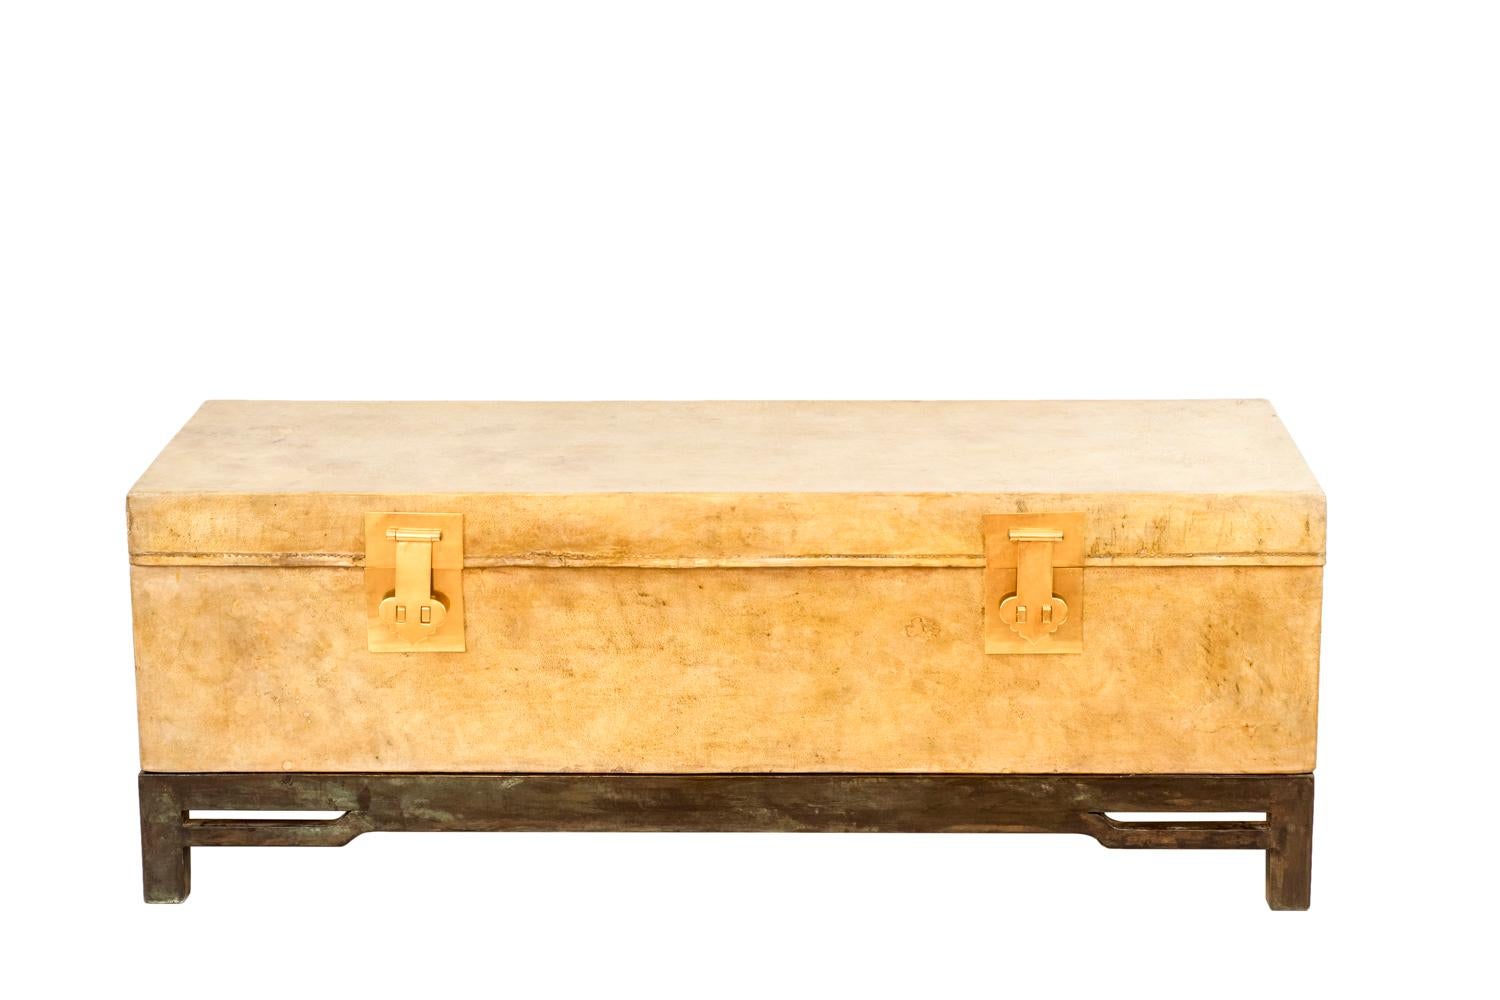 Rectangular shape coffer in cream parchment opening by a top flap, closed thanks to two gilt brass latches.
Interior in dark brown parchment.
It stands on a green-brown lacquered wood base with four square legs and an openwork apron.
Movable coffer